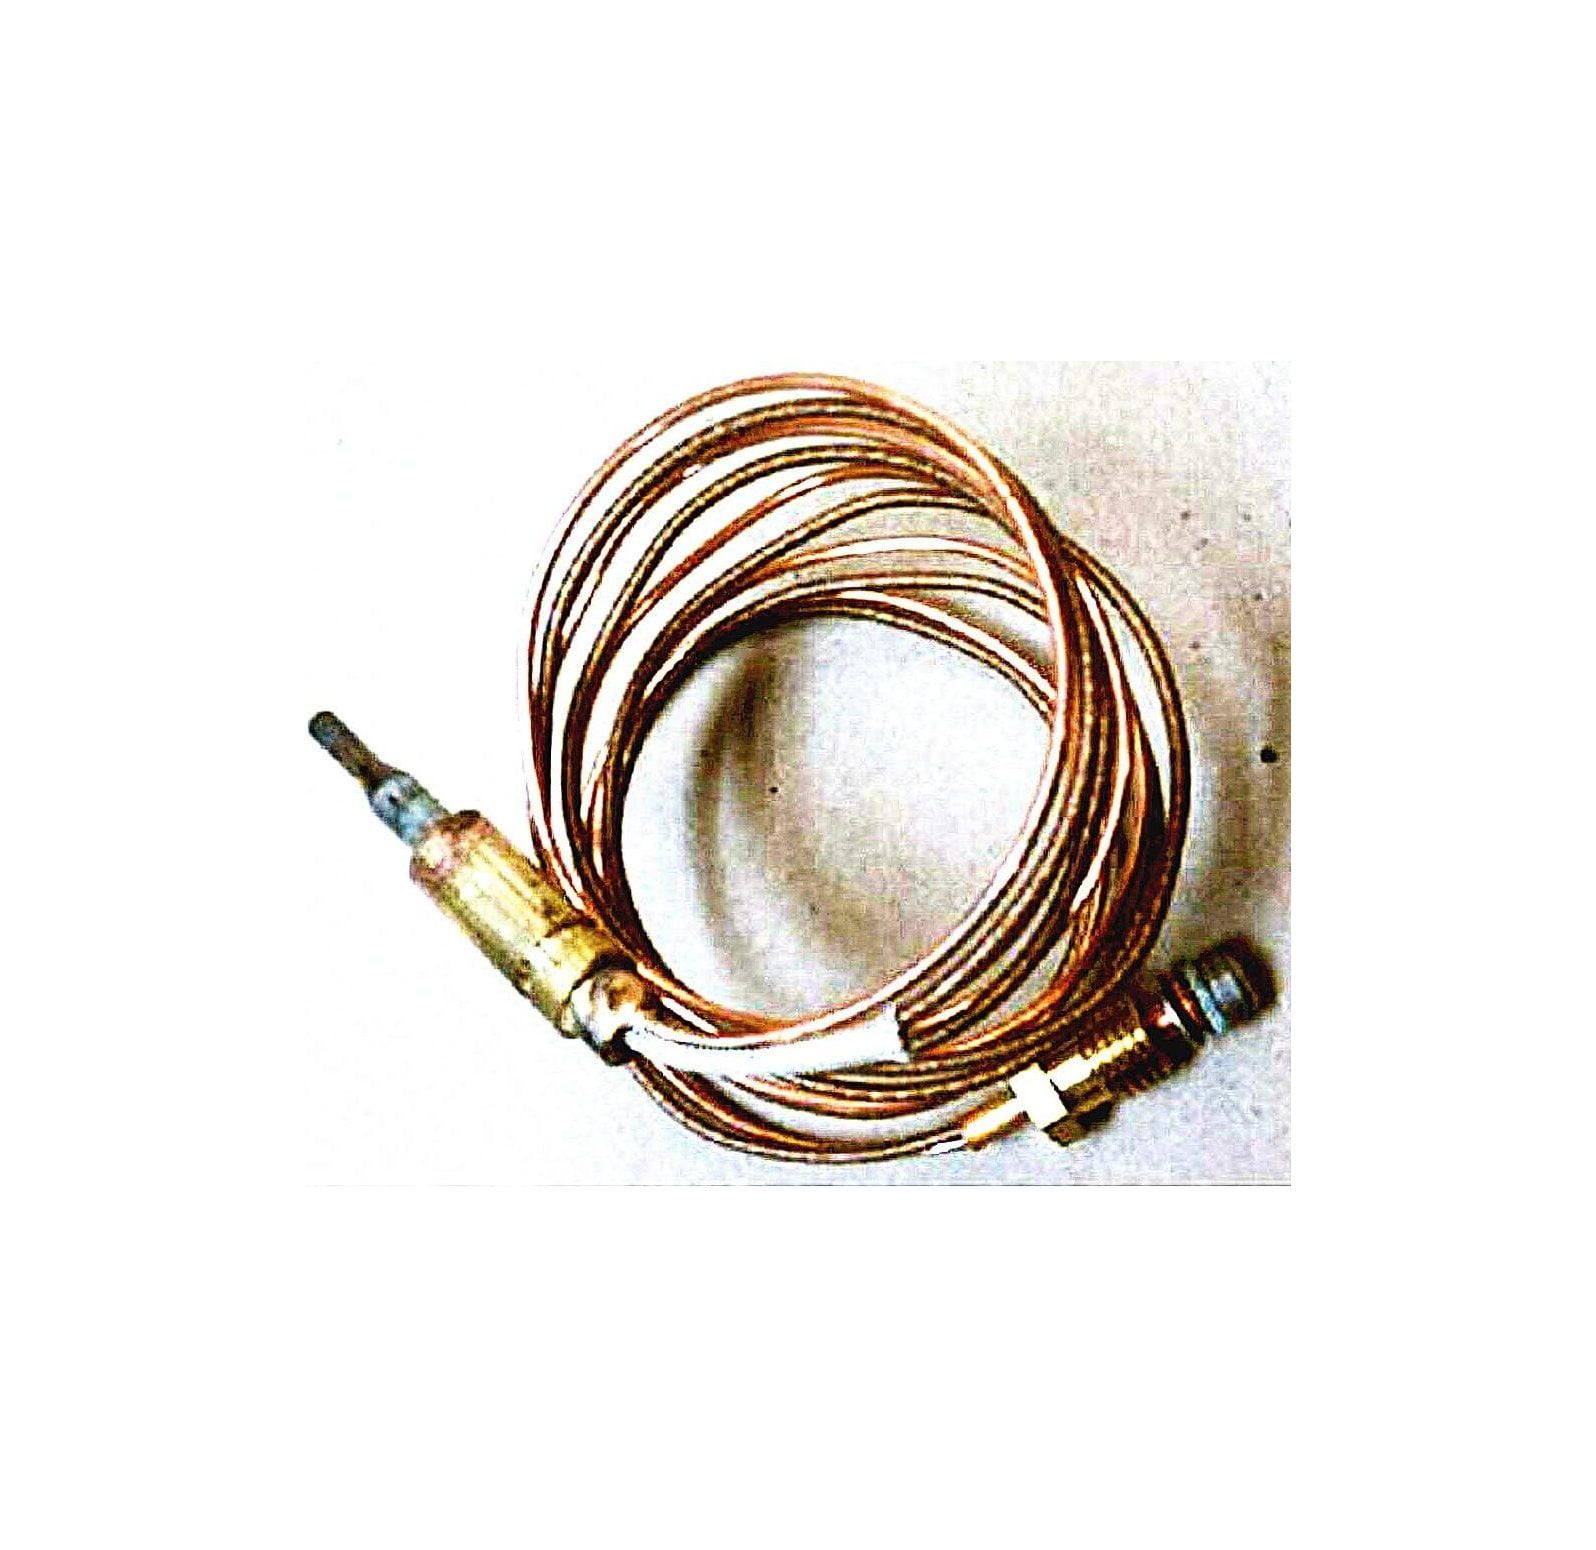 WBTAYB Part # R6310 - Fits for Empire Vent Free Heater Thermocouple 29 inch  Course Thread 